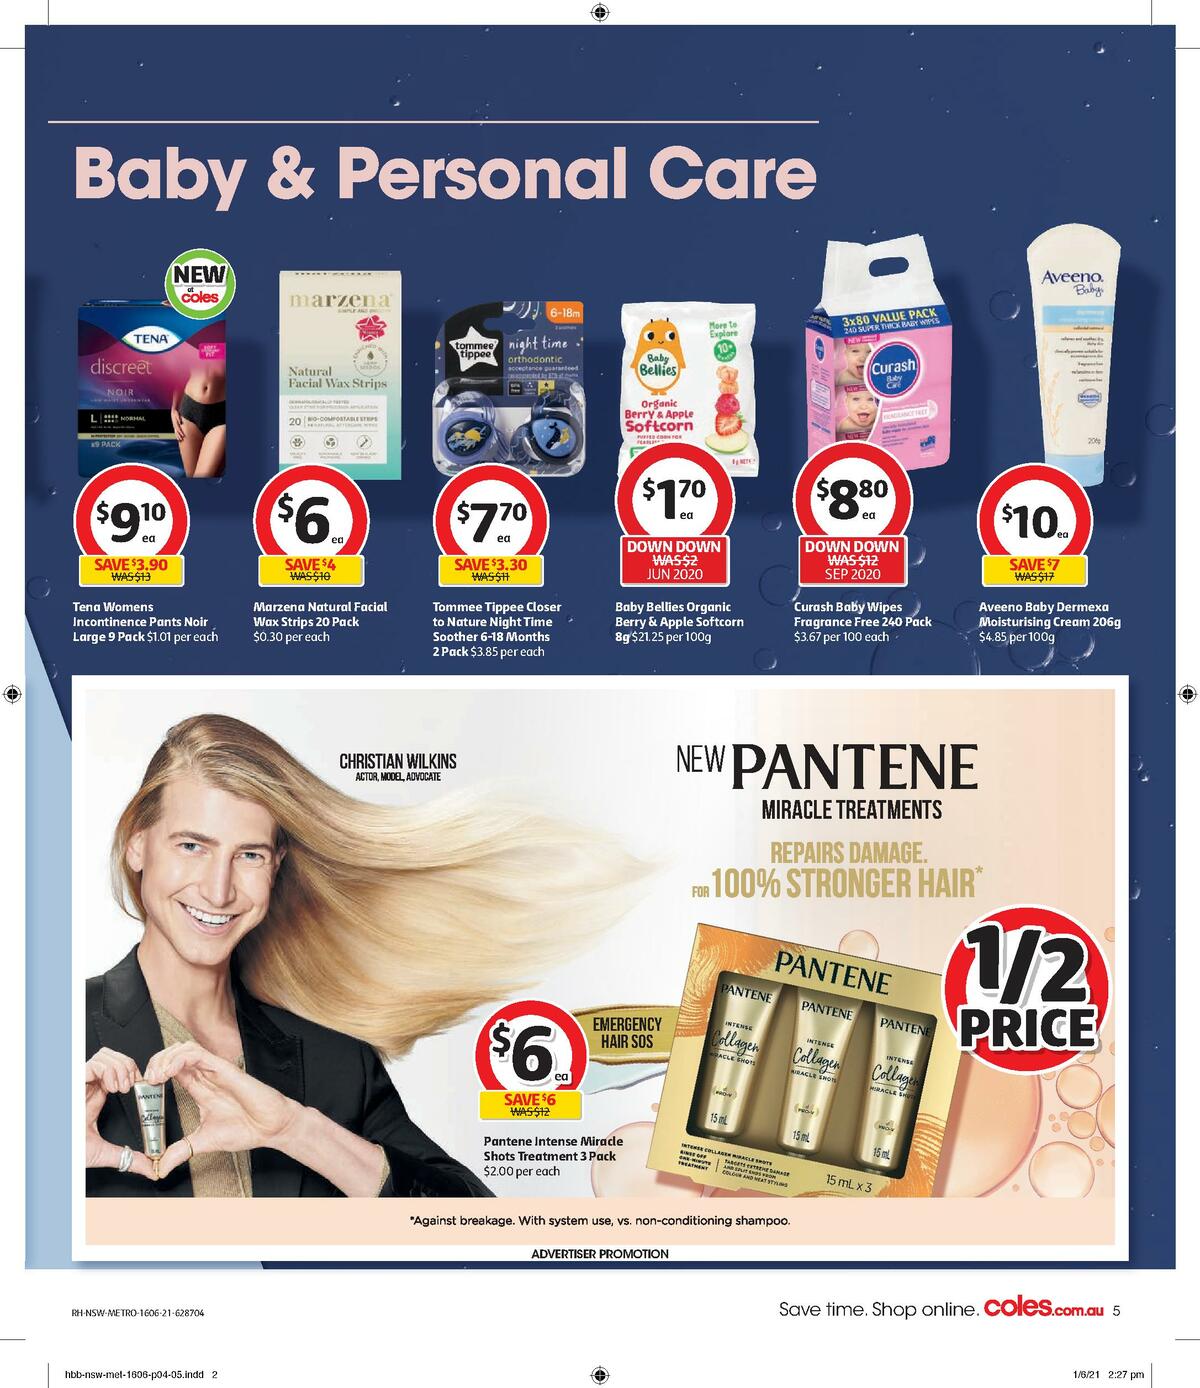 Coles Health & Beauty Catalogues from 16 June